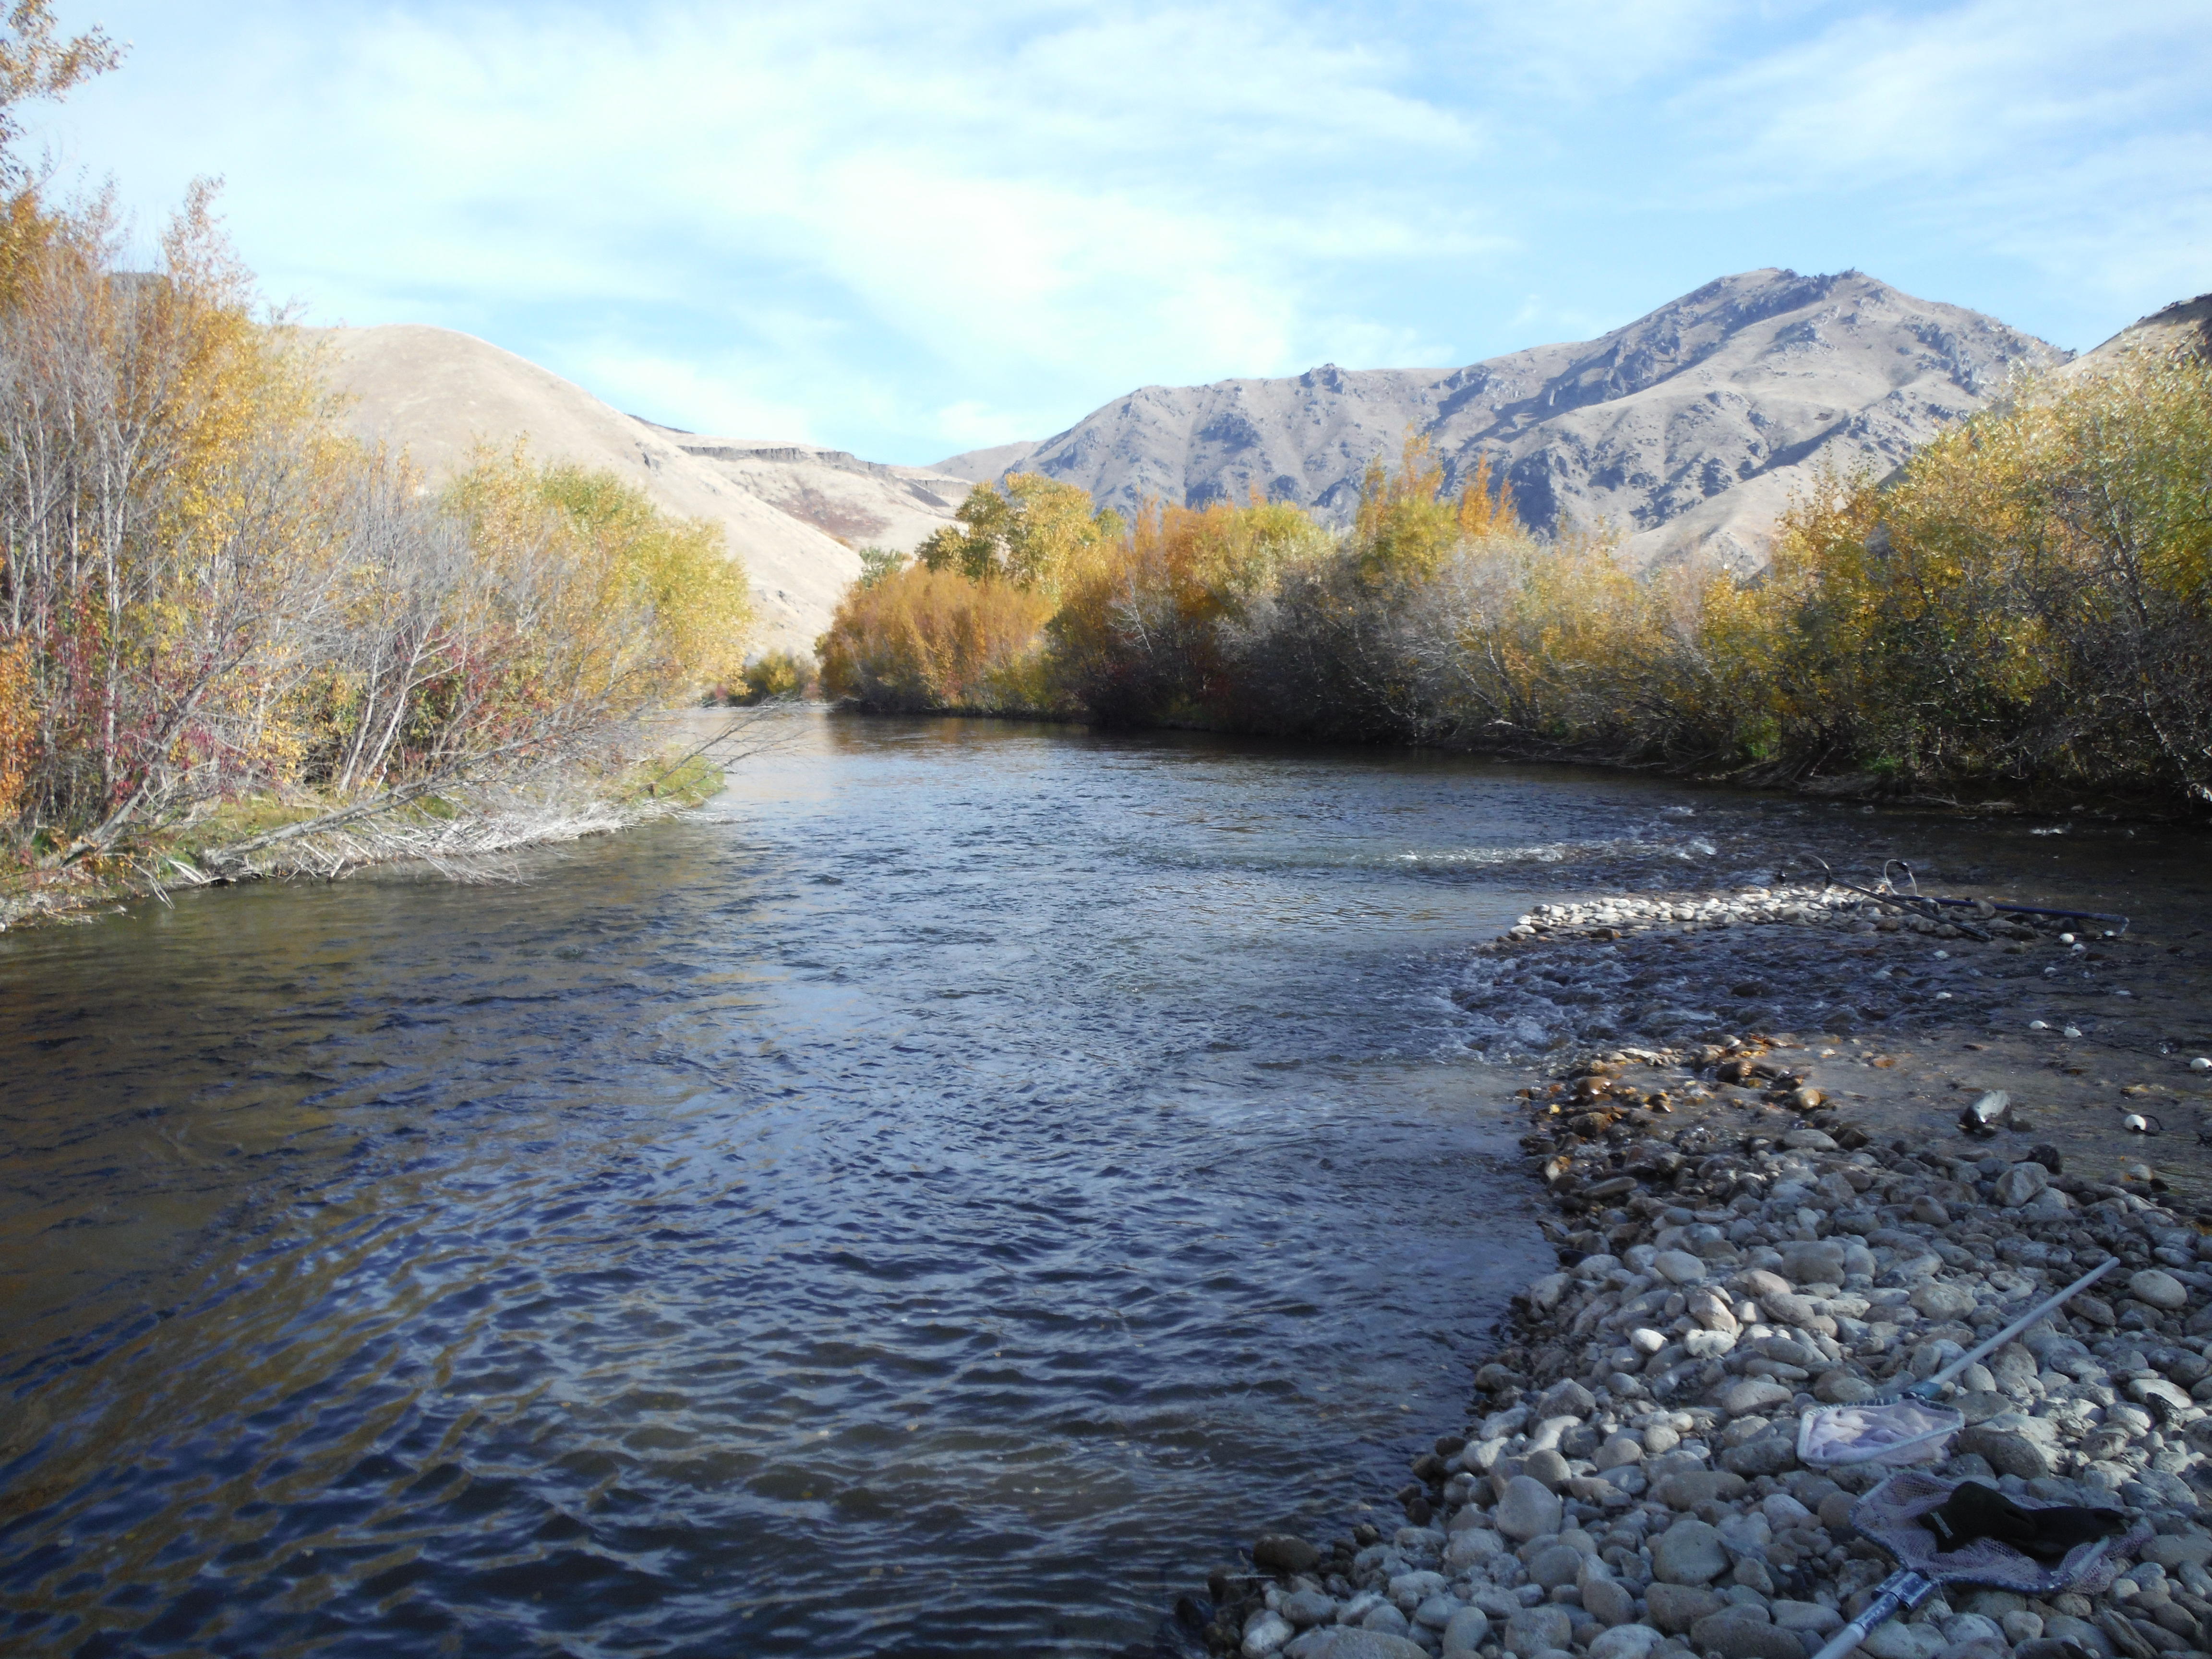 South Fork of the Boise River 10.1.17